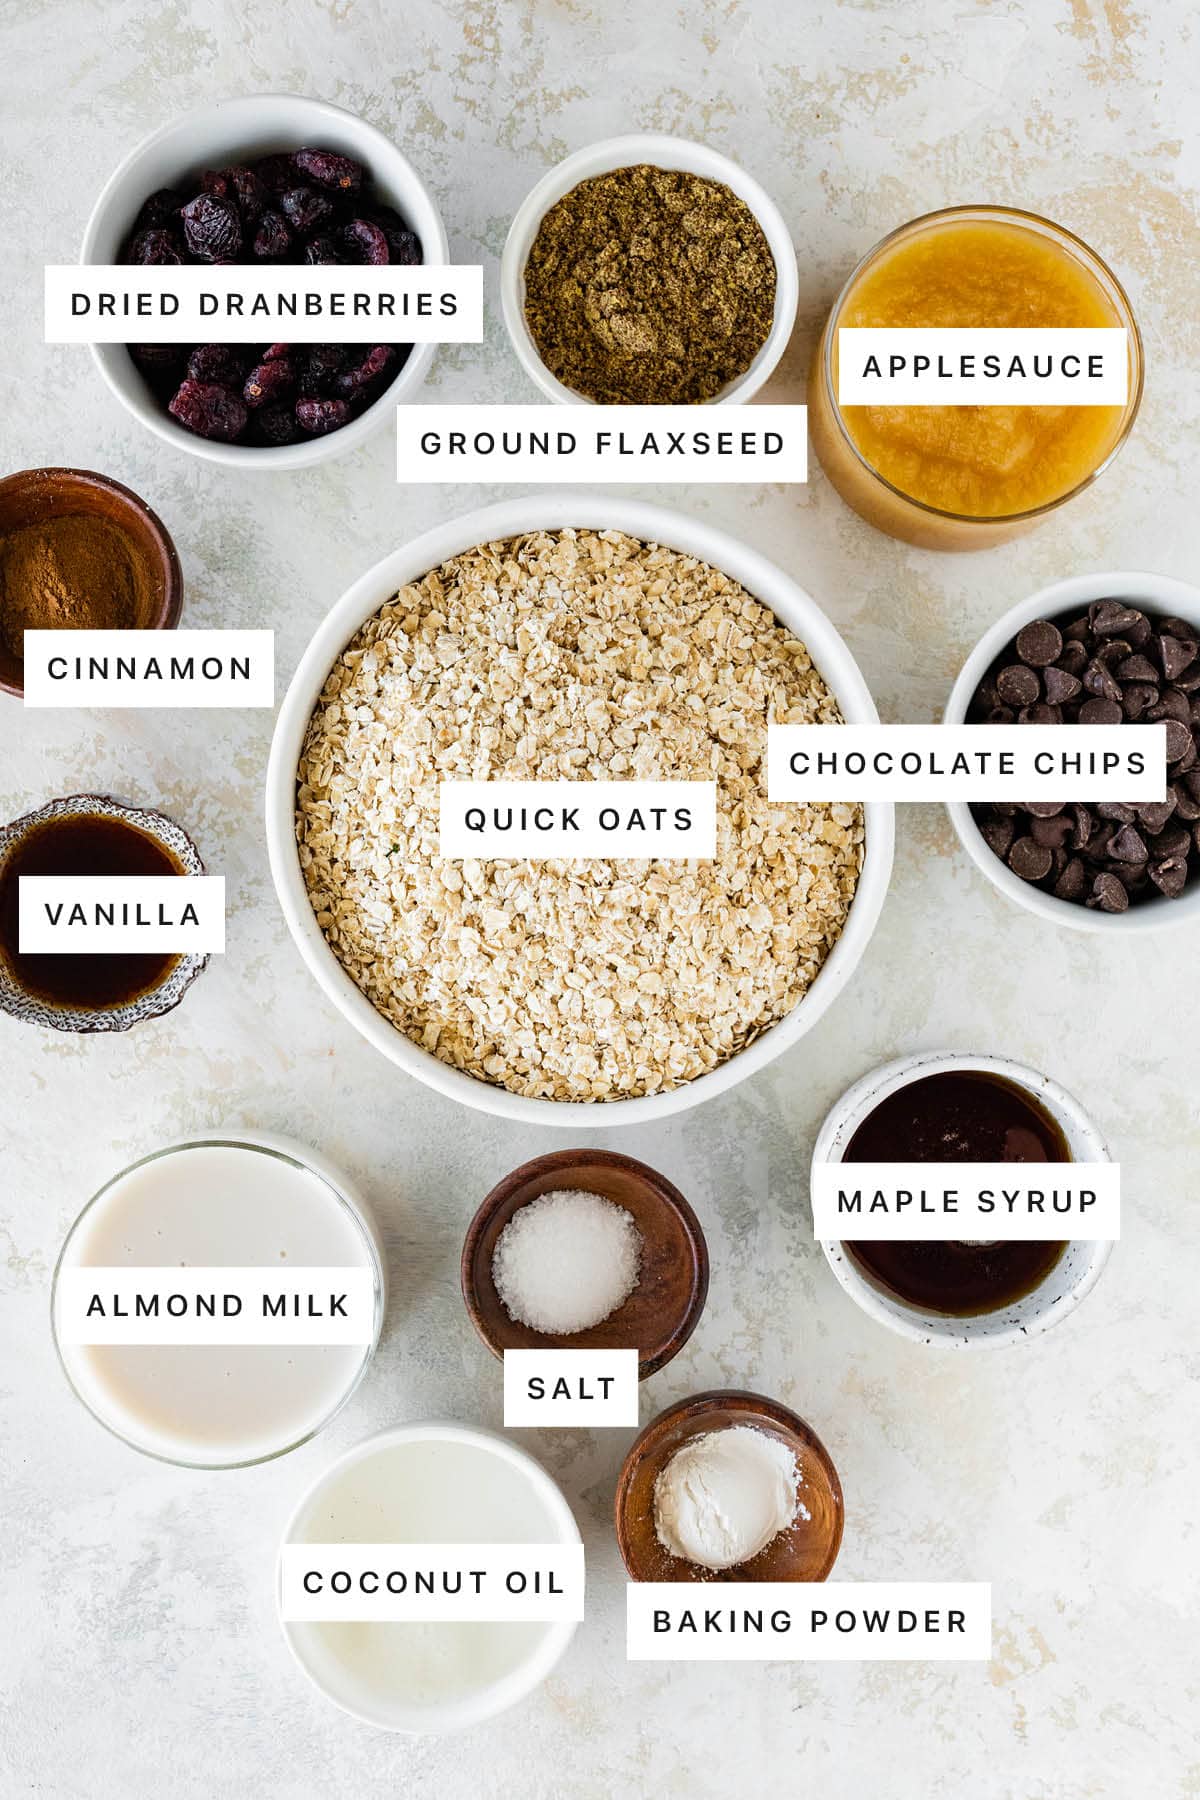 Ingredients measured out to make Oatmeal Breakfast Bars: dried cranberries, ground flaxseed, applesauce, cinnamon, quick oats, chocolate chips, vanilla, maple syrup, salt, almond milk, coconut oil and baking powder.